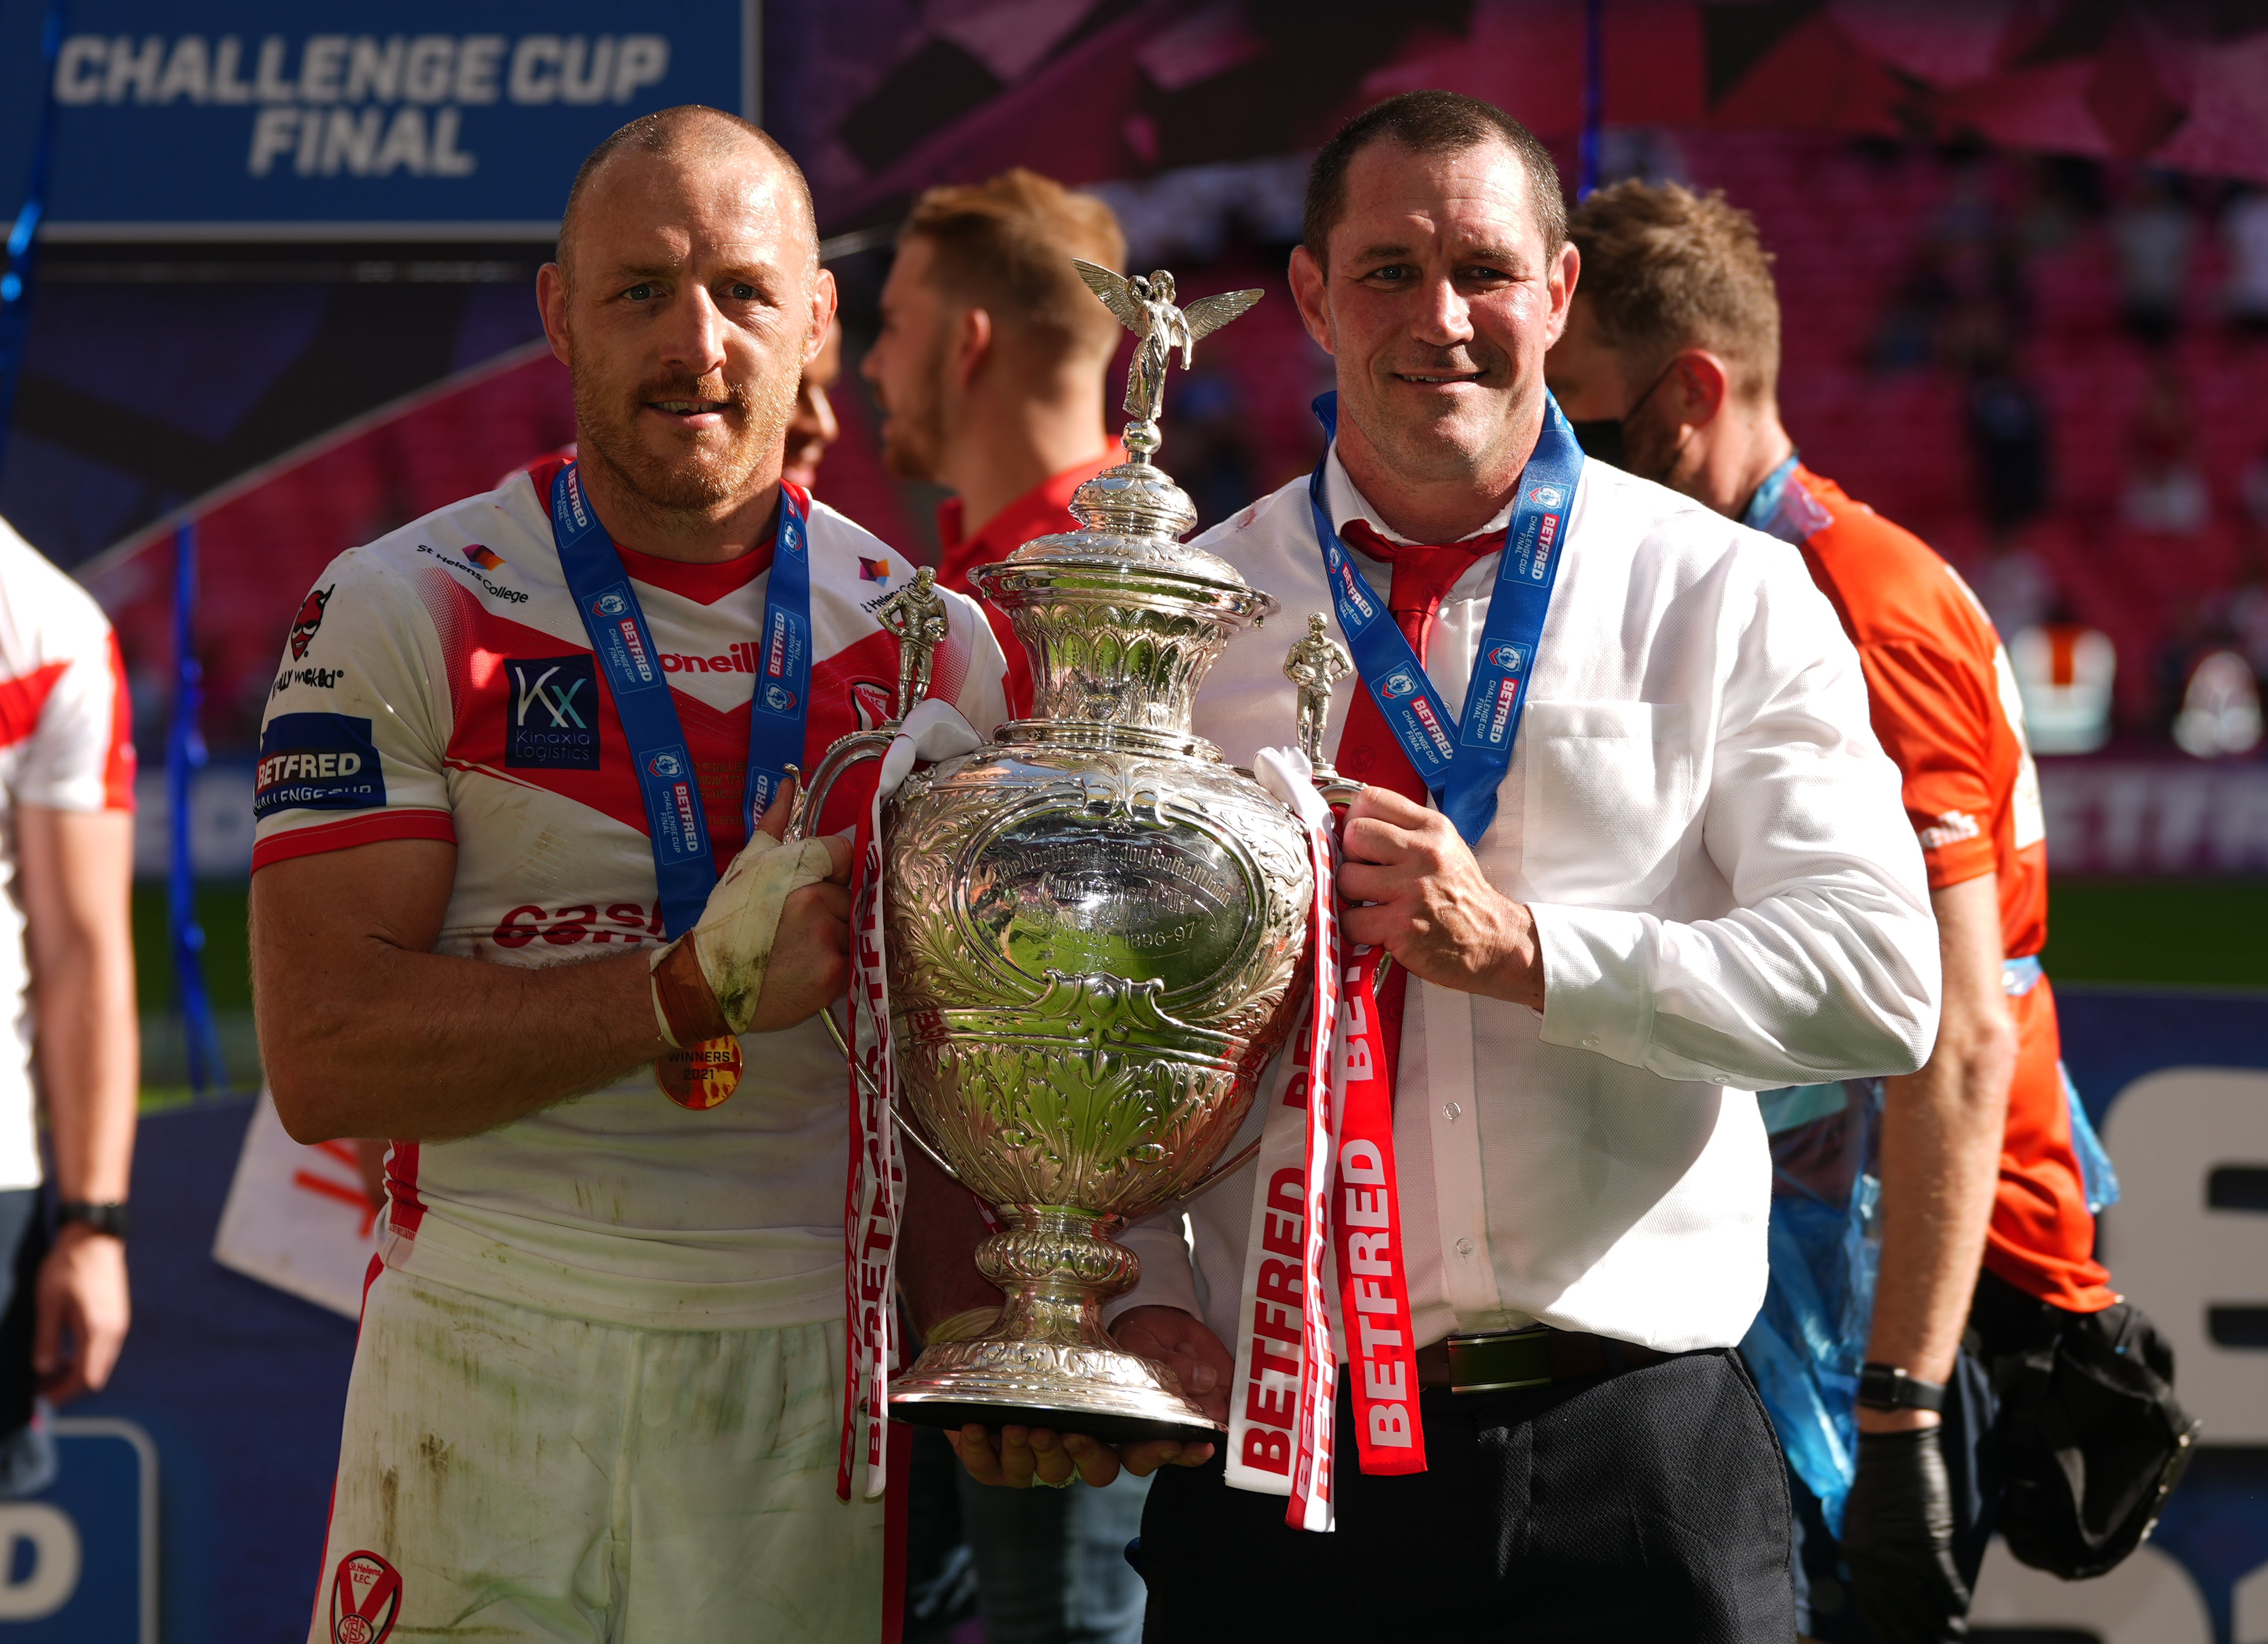 St Helens’ James Roby (left) and head coach Kristian Woolf celebrate with the Challenge Cup trophy